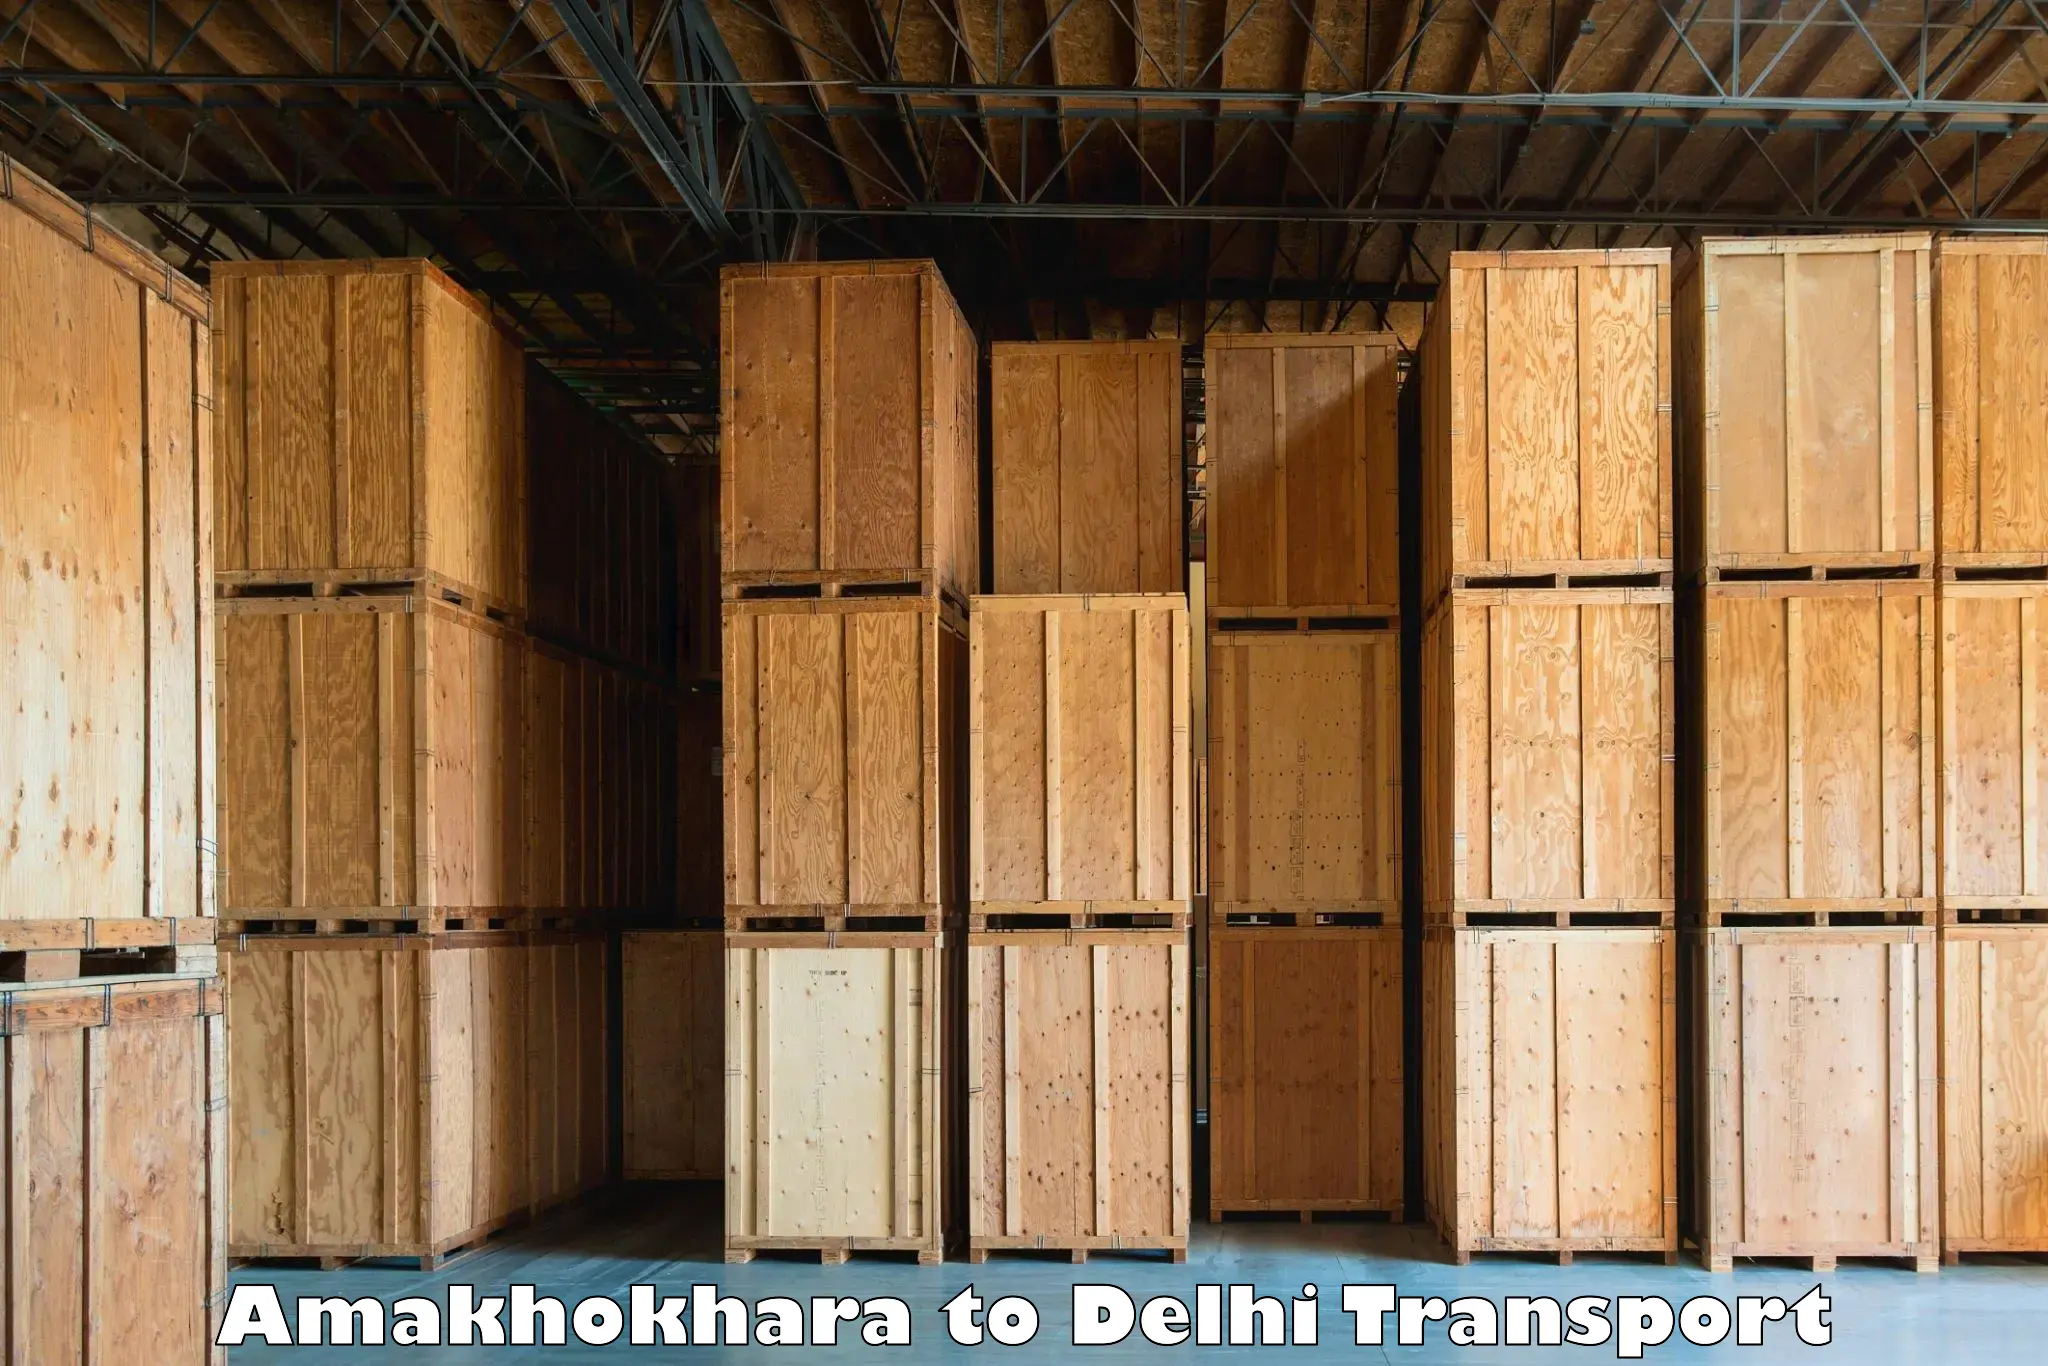 Truck transport companies in India Amakhokhara to Indraprastha